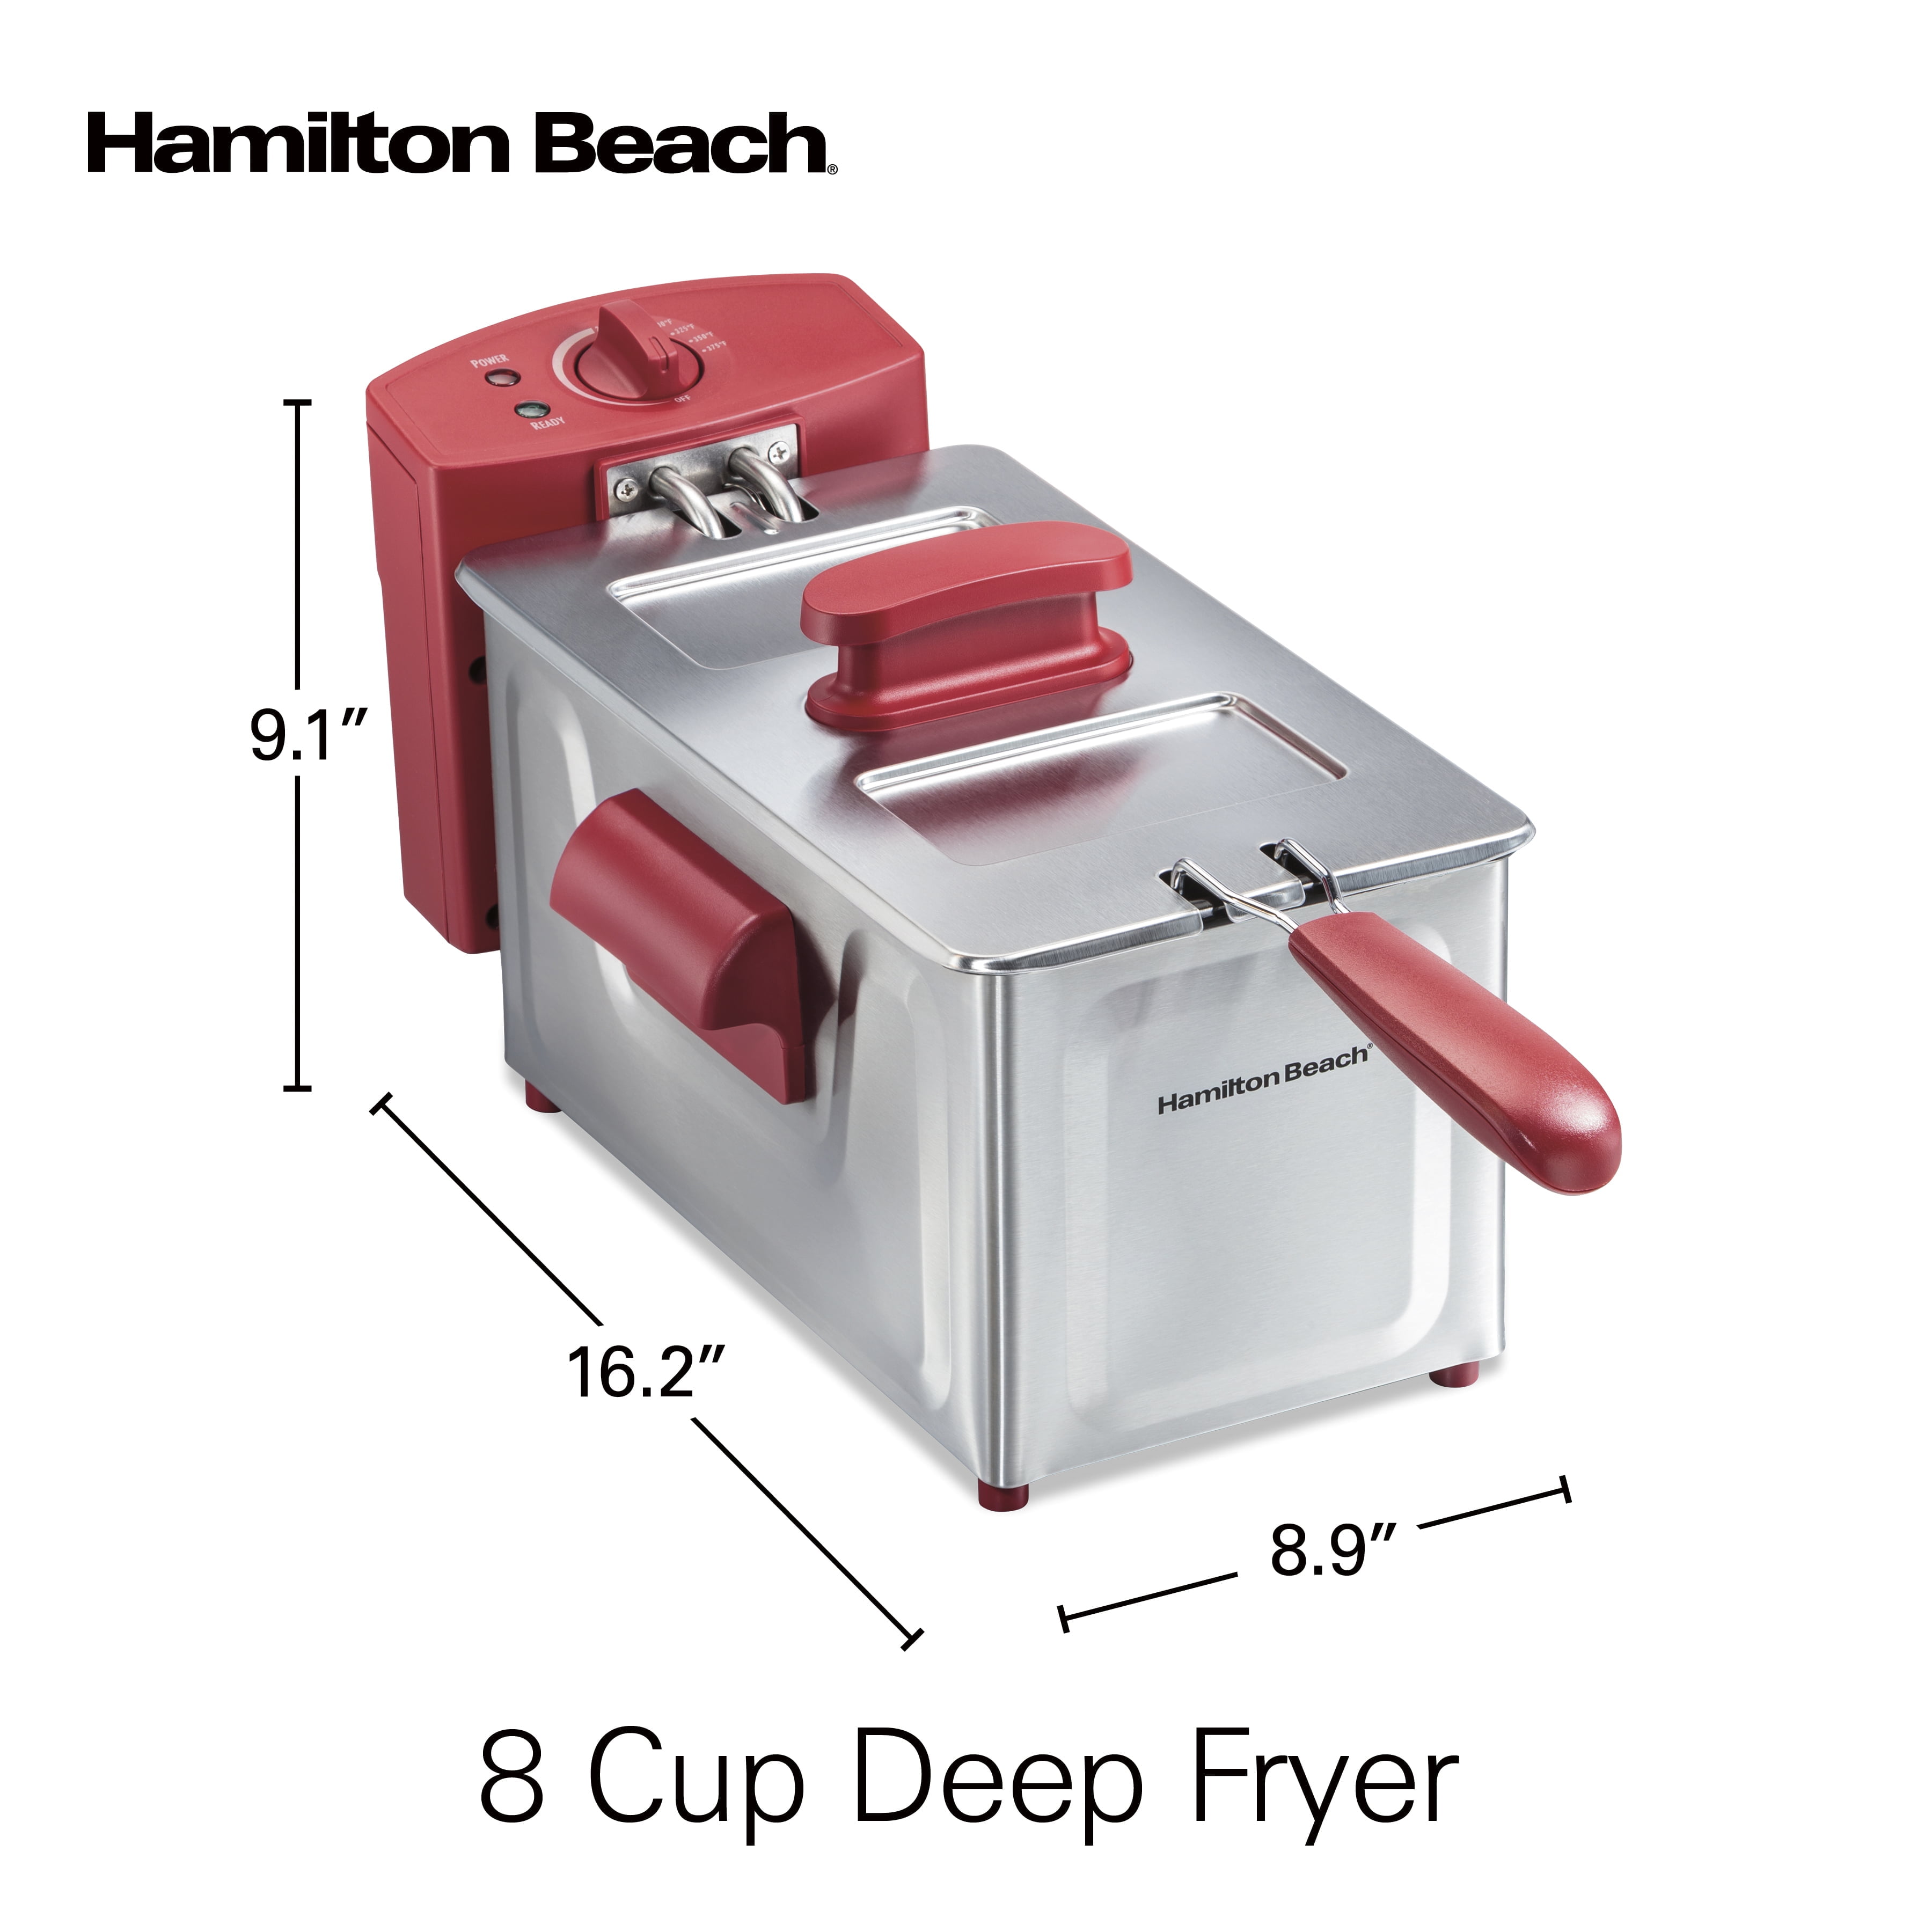 Hamilton Beach Electric Deep Fryer, 8 Cups / 2 Liters Oil Capacity, Black &  Food Processor & Vegetable Chopper for Slicing, Shredding, Mincing, and